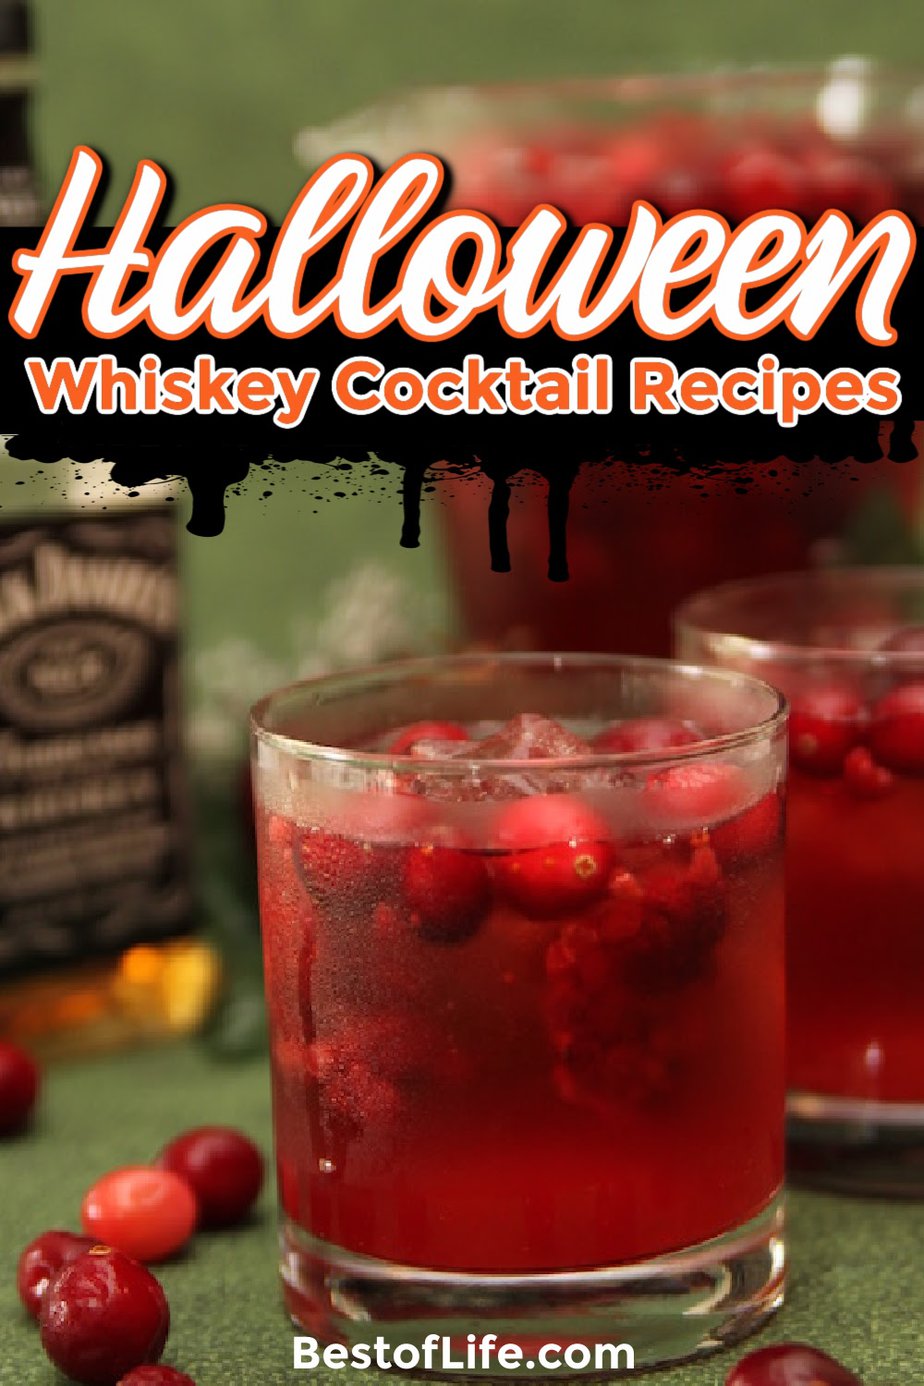 Make these Halloween cocktails with whiskey at your Halloween party or as you wait to hand out candy for a happy Halloween. Halloween Party Cocktails | Halloween Drink Recipes | Whiskey Recipes | Bloody Whiskey Cocktails | Whiskey Party Recipes | Halloween Cocktails | Halloween Cocktail Recipes | Drink Recipes for Adults | Spooky Drinks for Adults | Halloween Recipes with Alcohol #halloweendrinks #whiskeycocktails via @thebestoflife